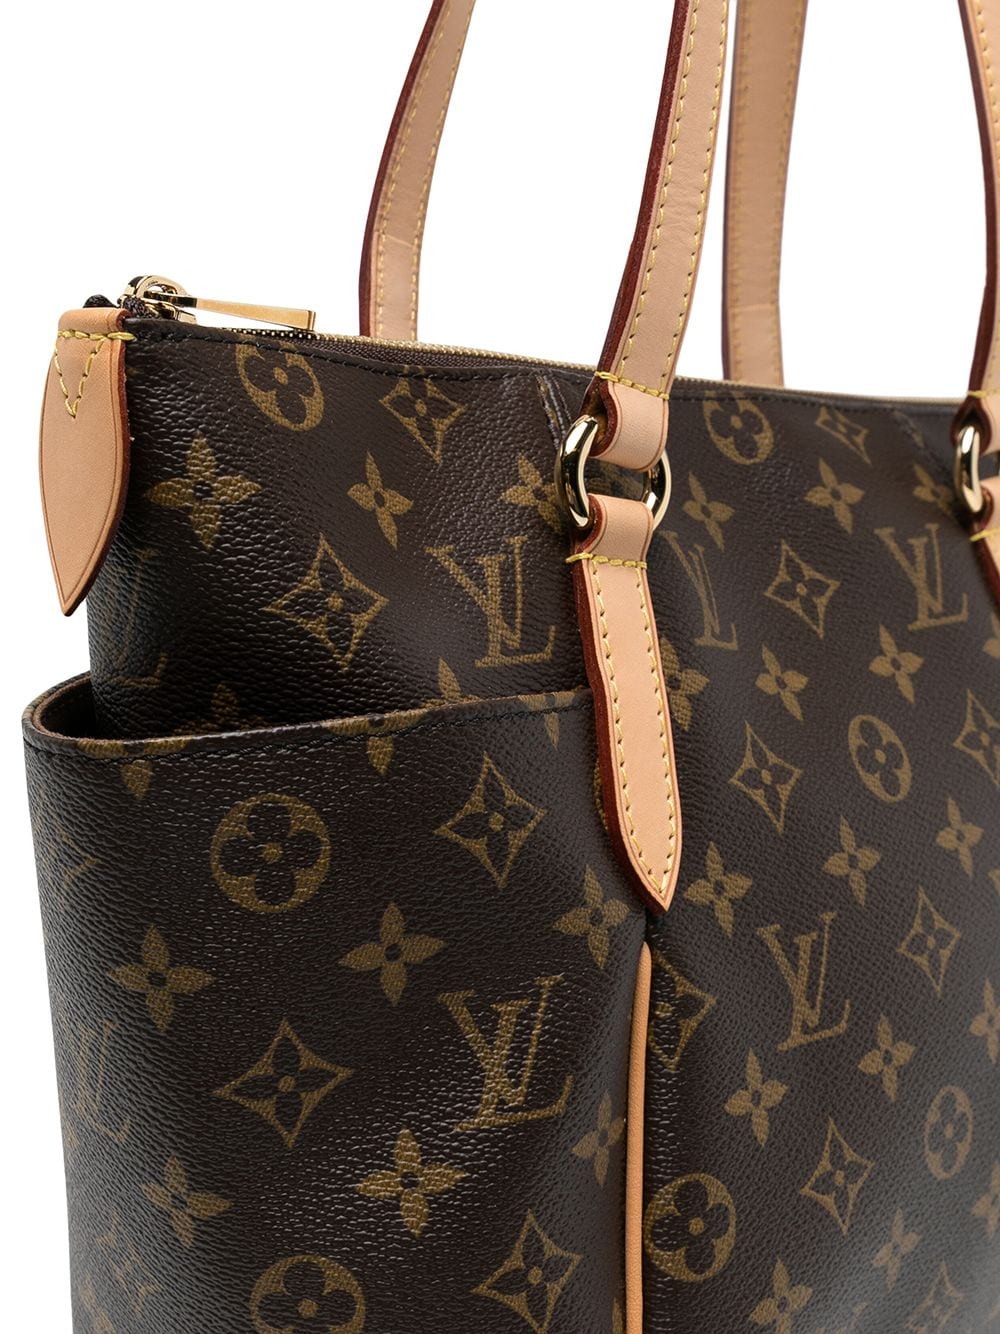 Louis+Vuitton+Totally+Shoulder+Bag+PM+Brown+Leather for sale online